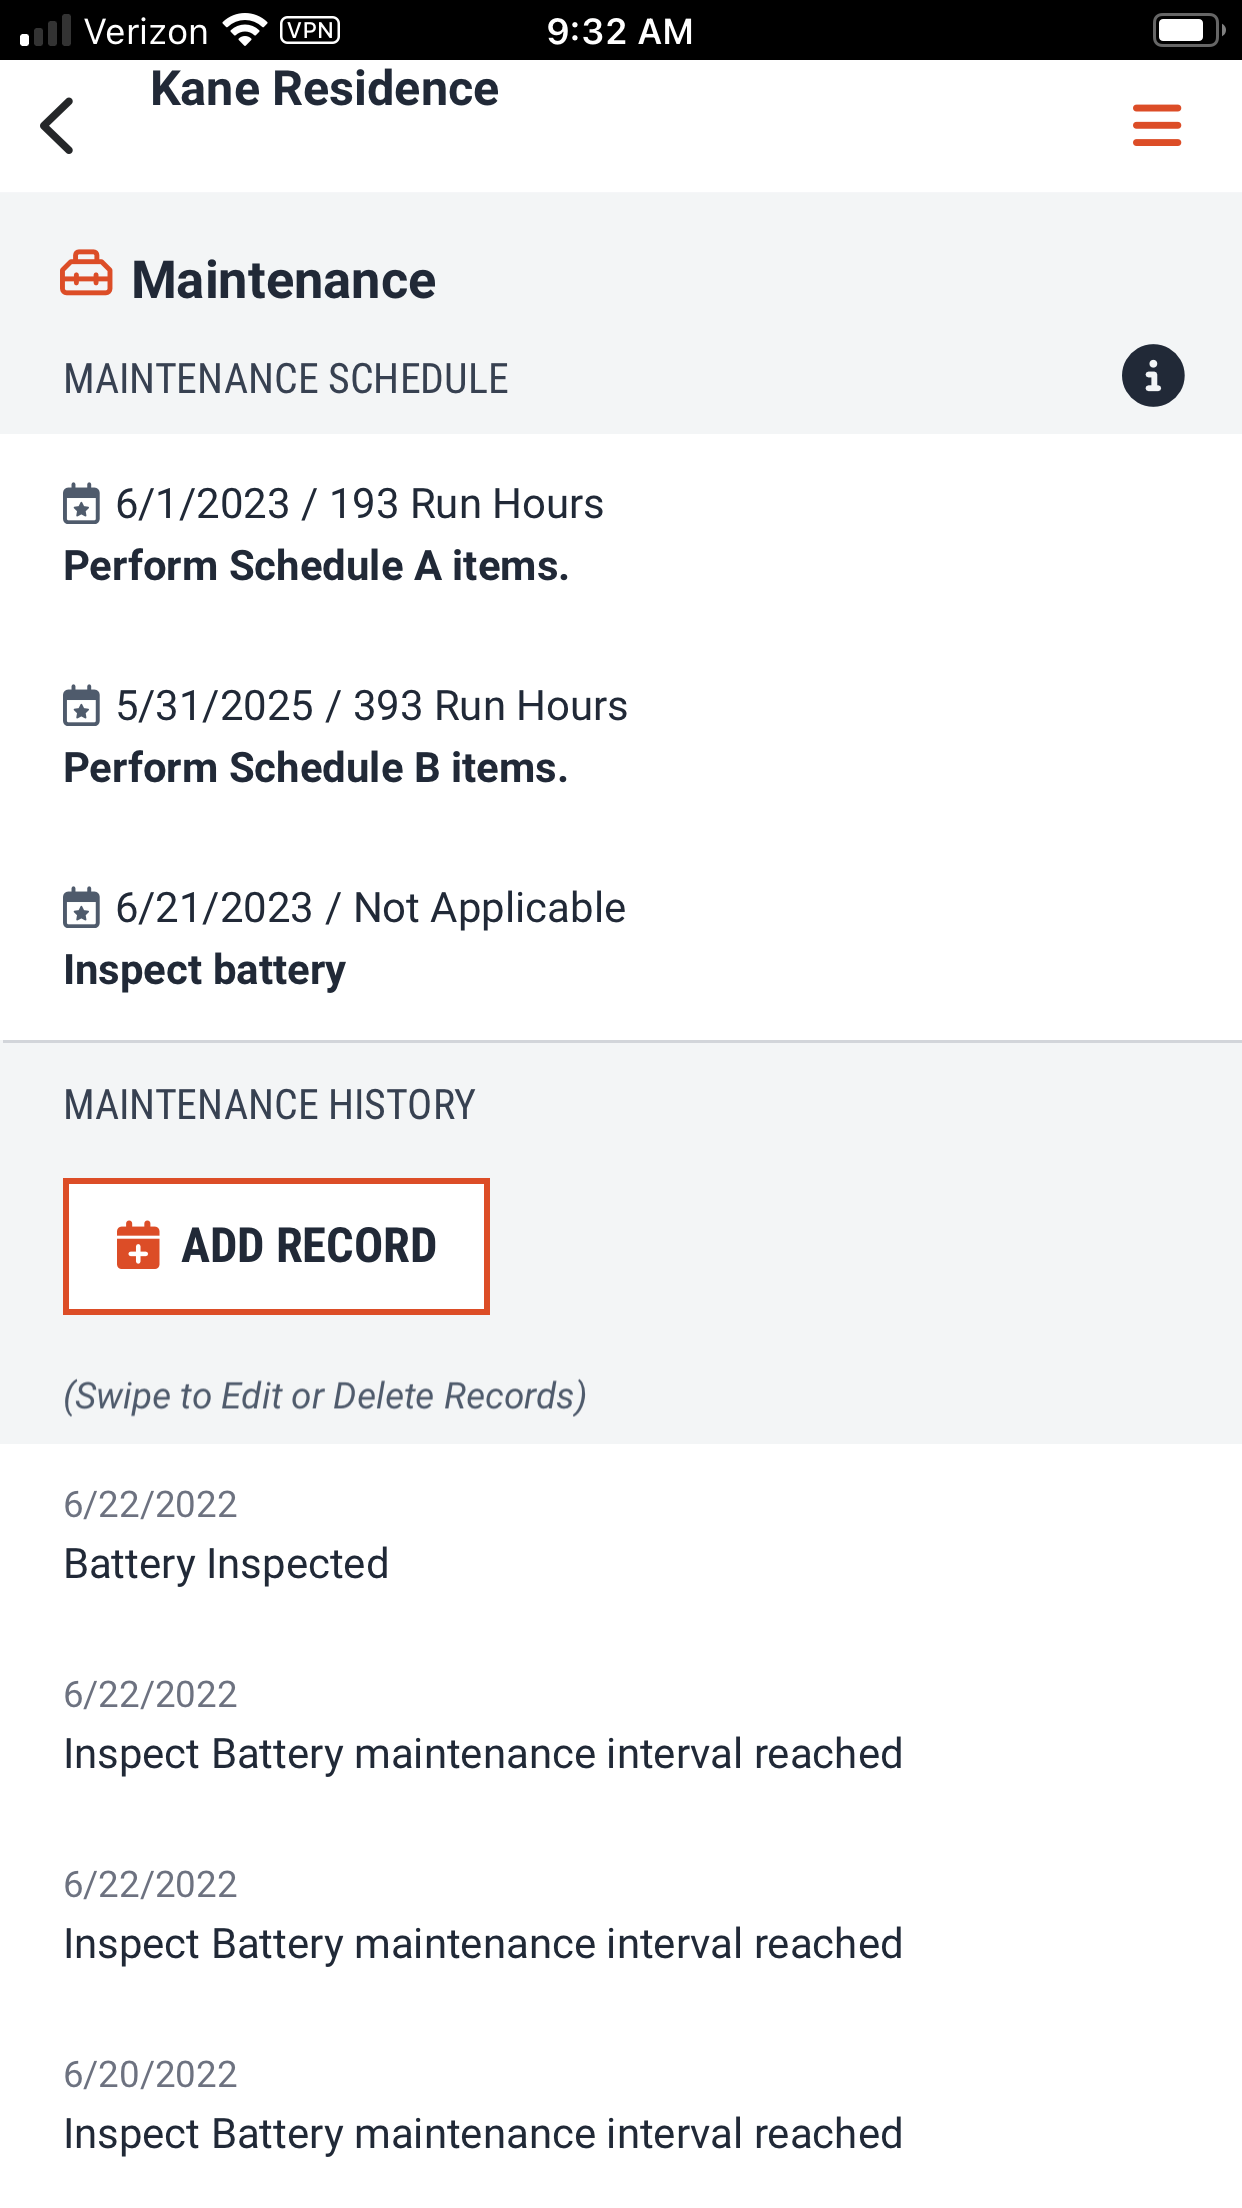 iphone-view-maintenance-history-records.png